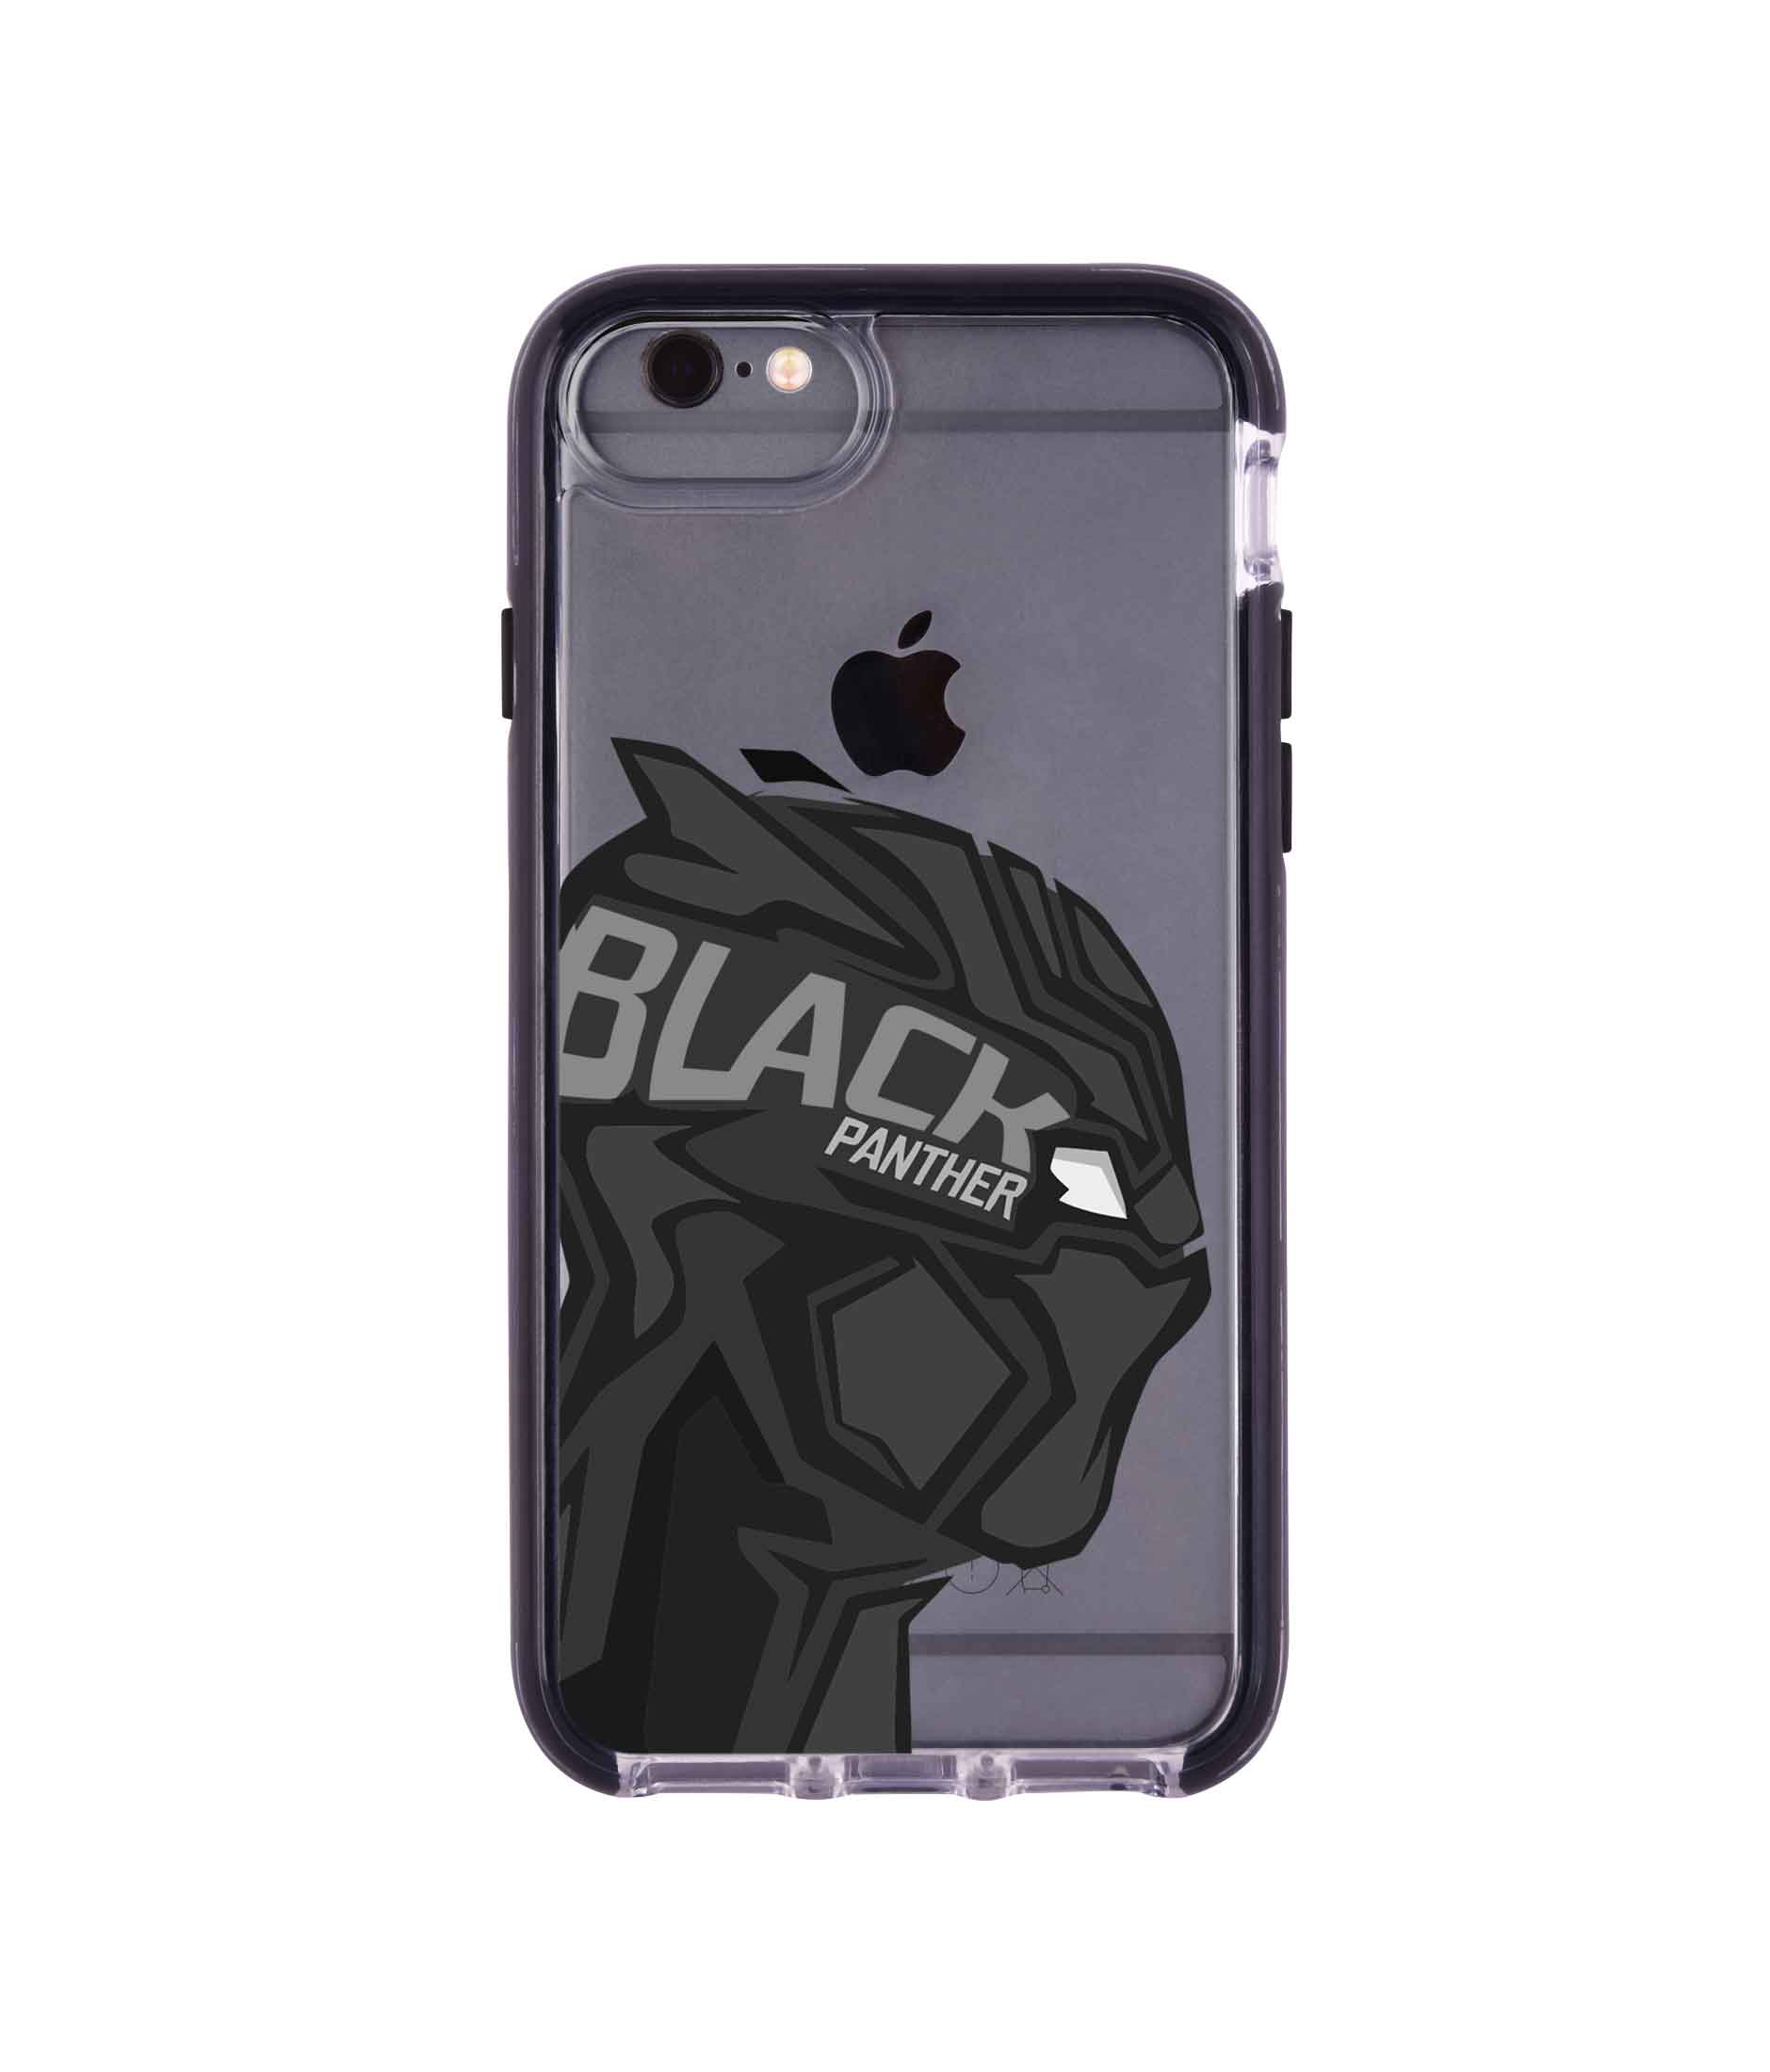 Black Panther Art - Extreme Phone Case for iPhone 6